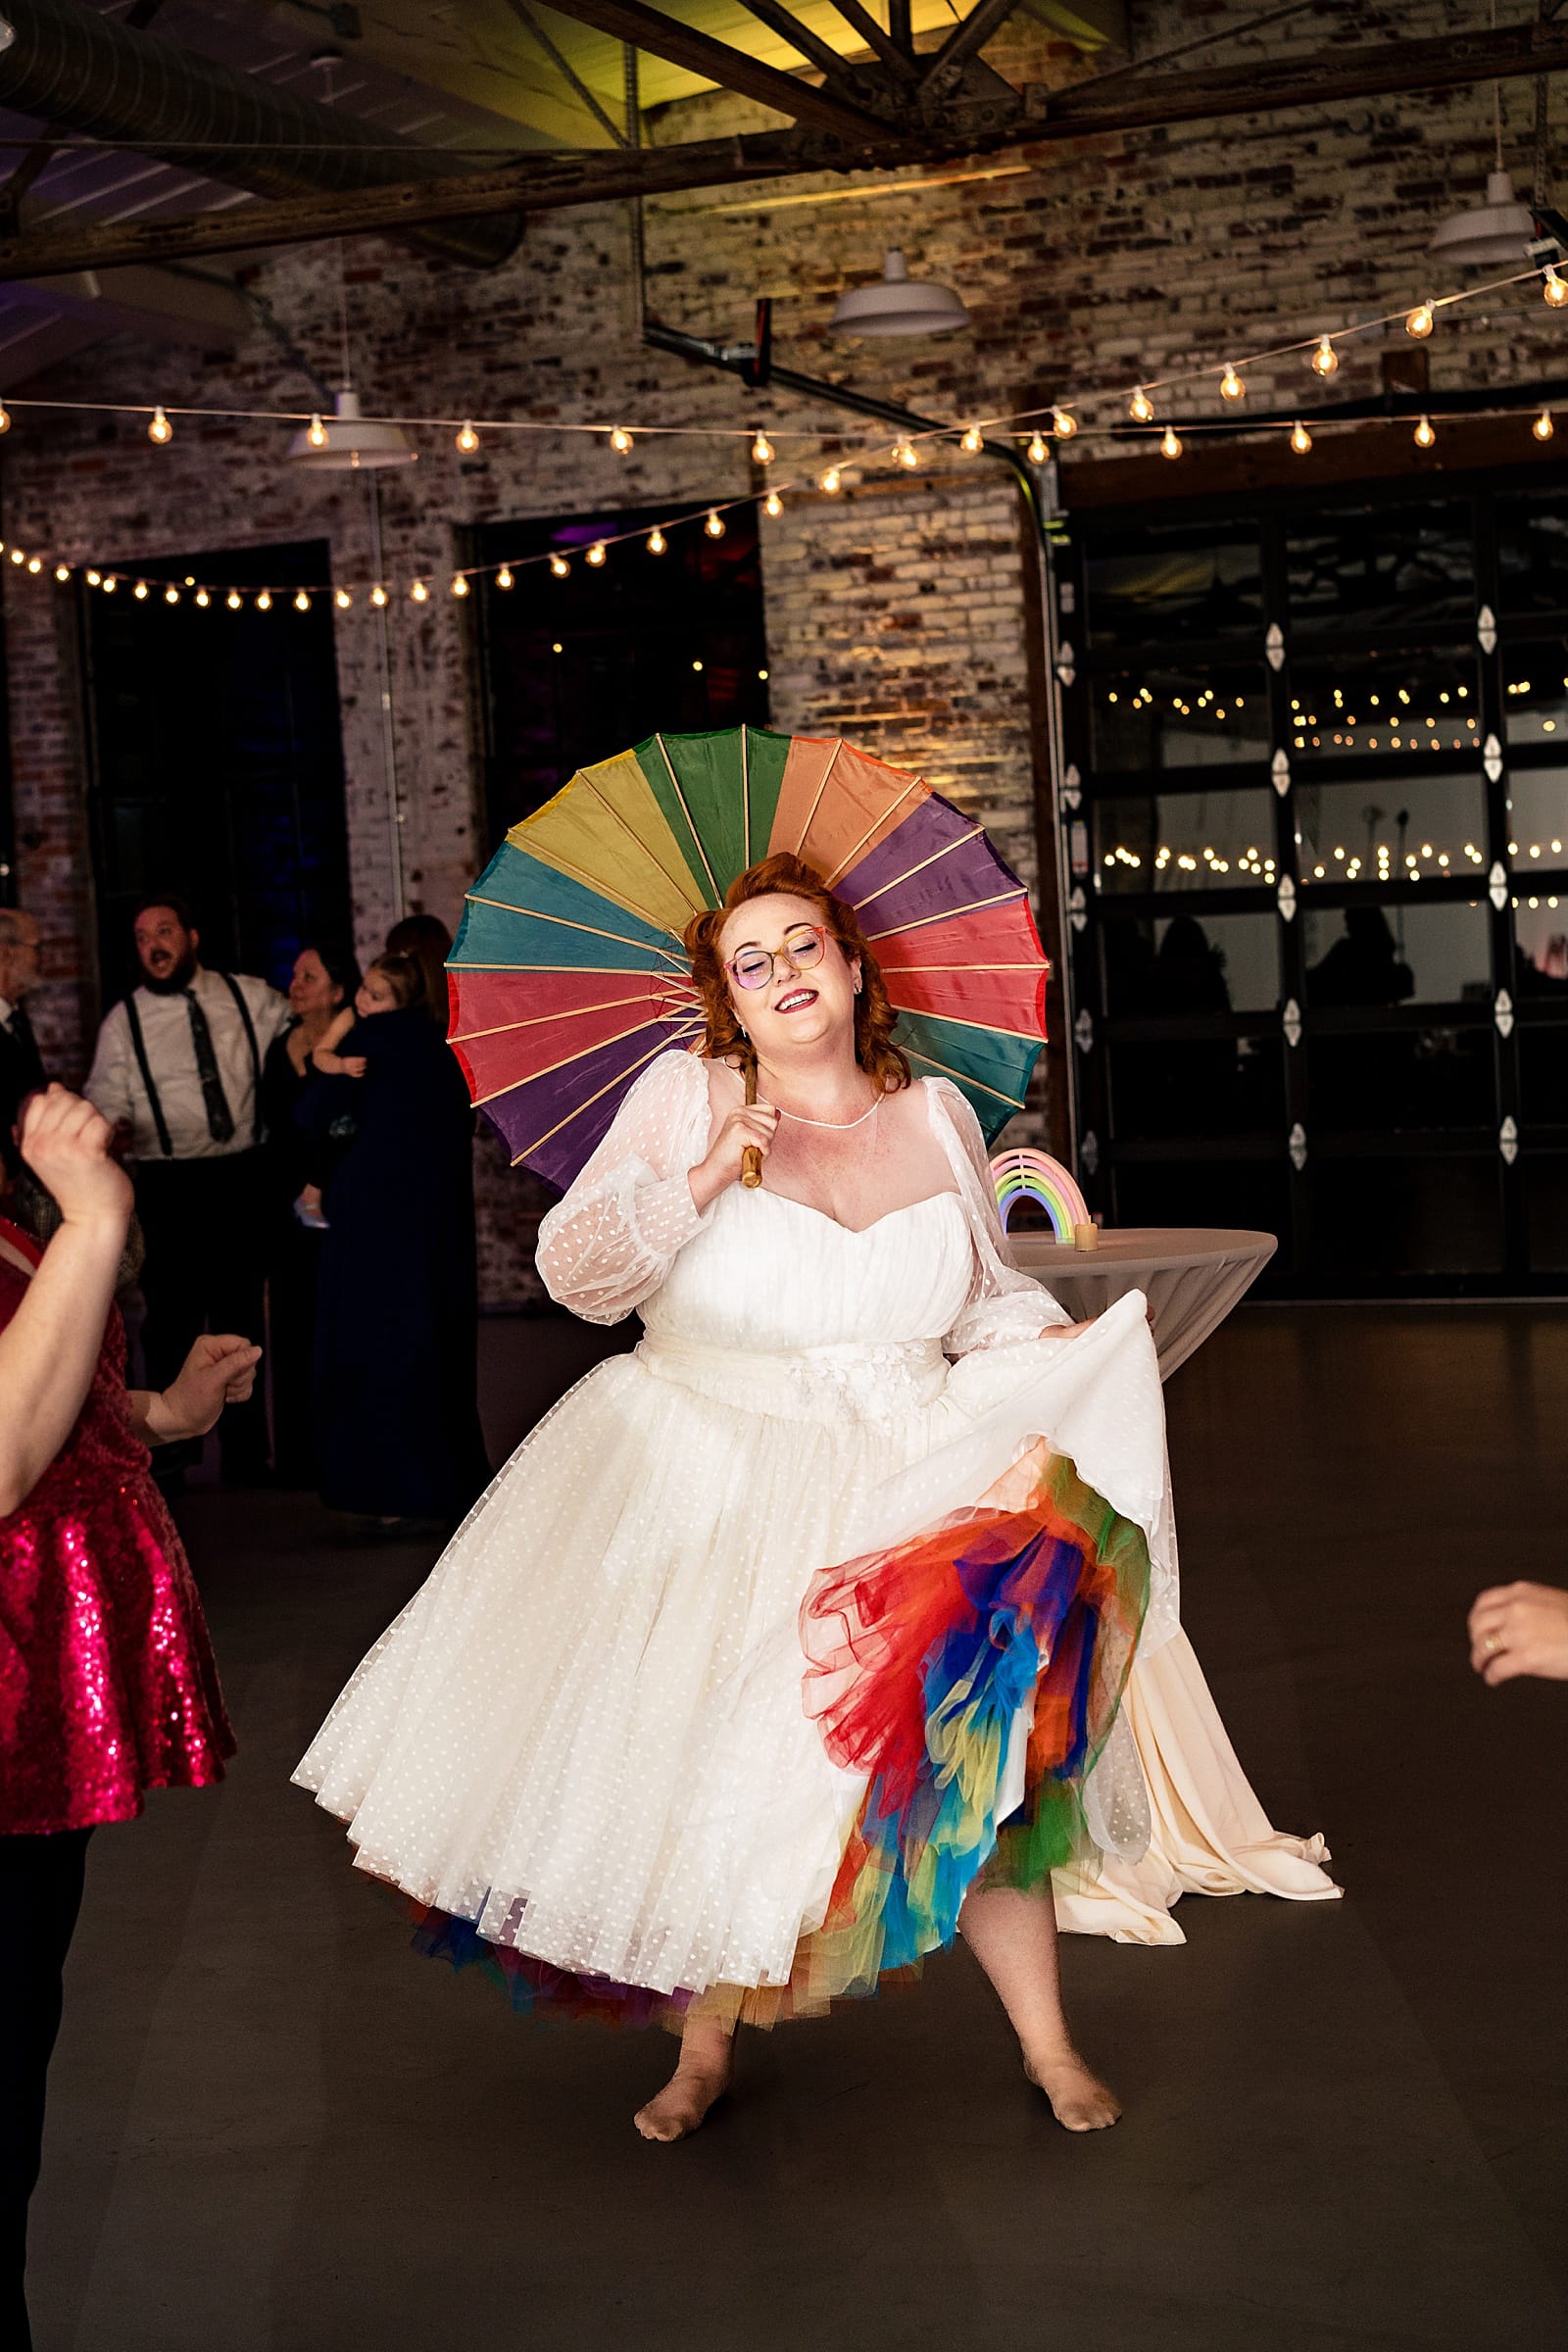 This bride had the most amazing rainbow wedding details